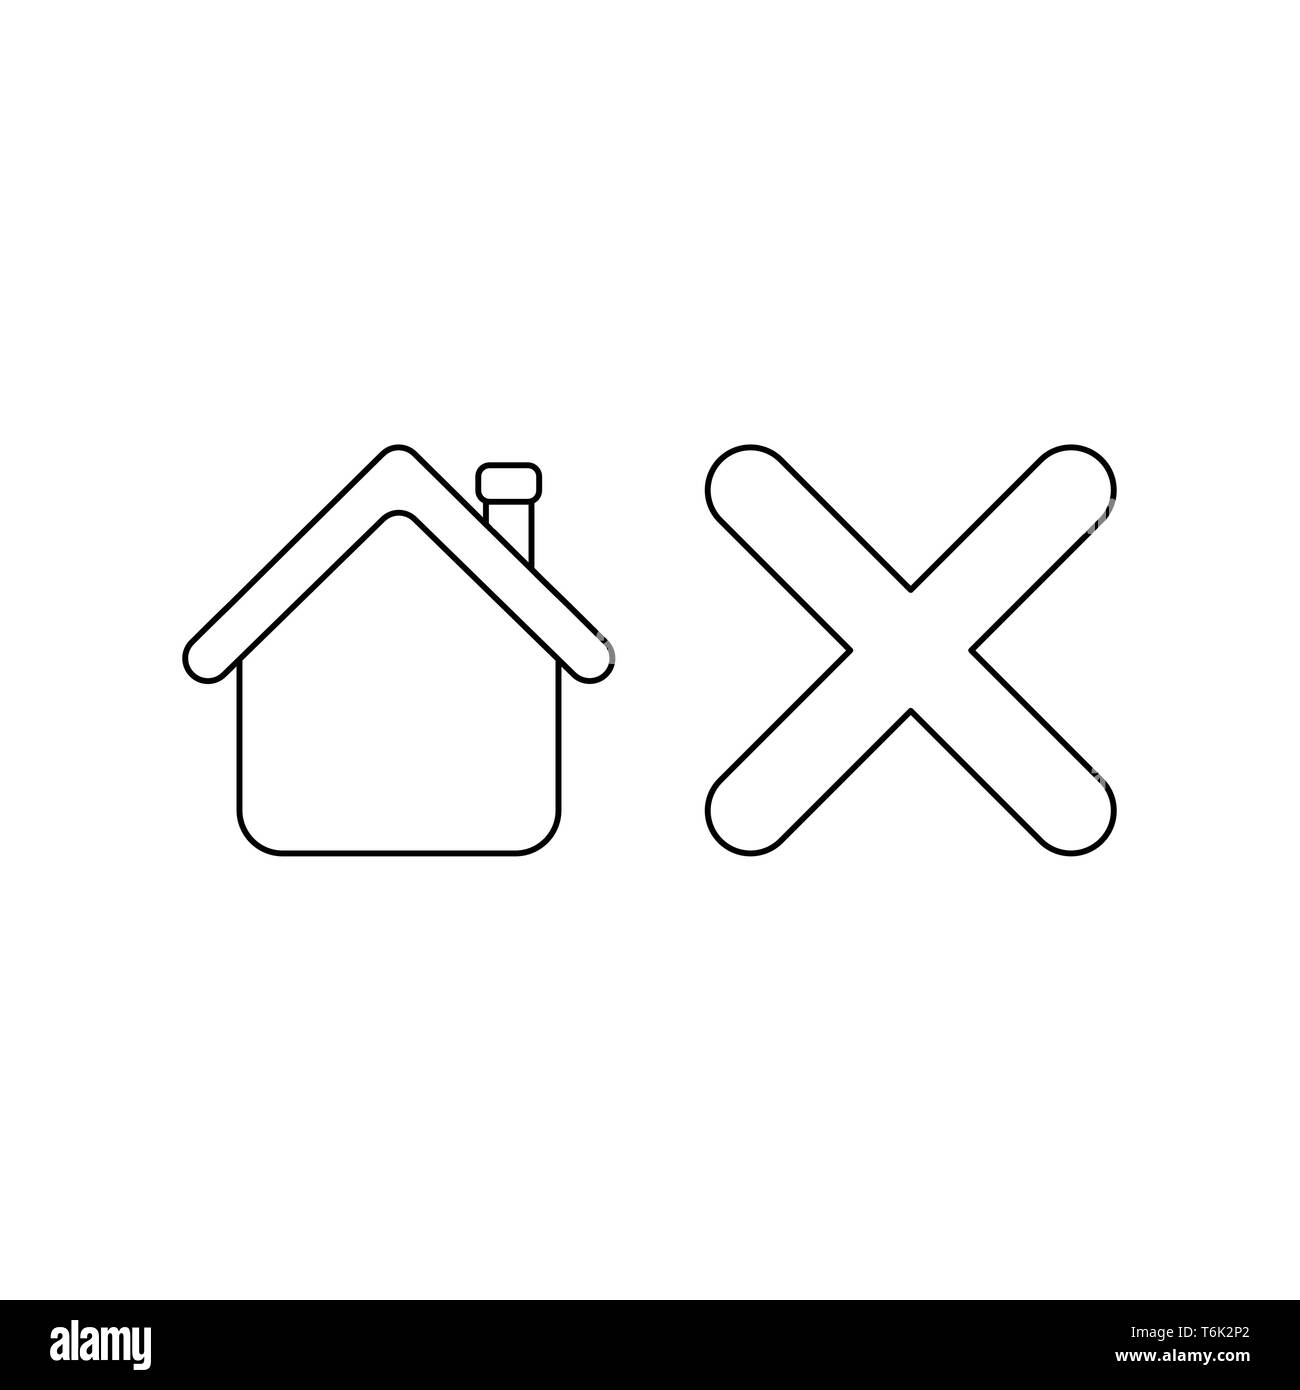 Vector icon concept of house with x mark. Black outlines. Stock Vector